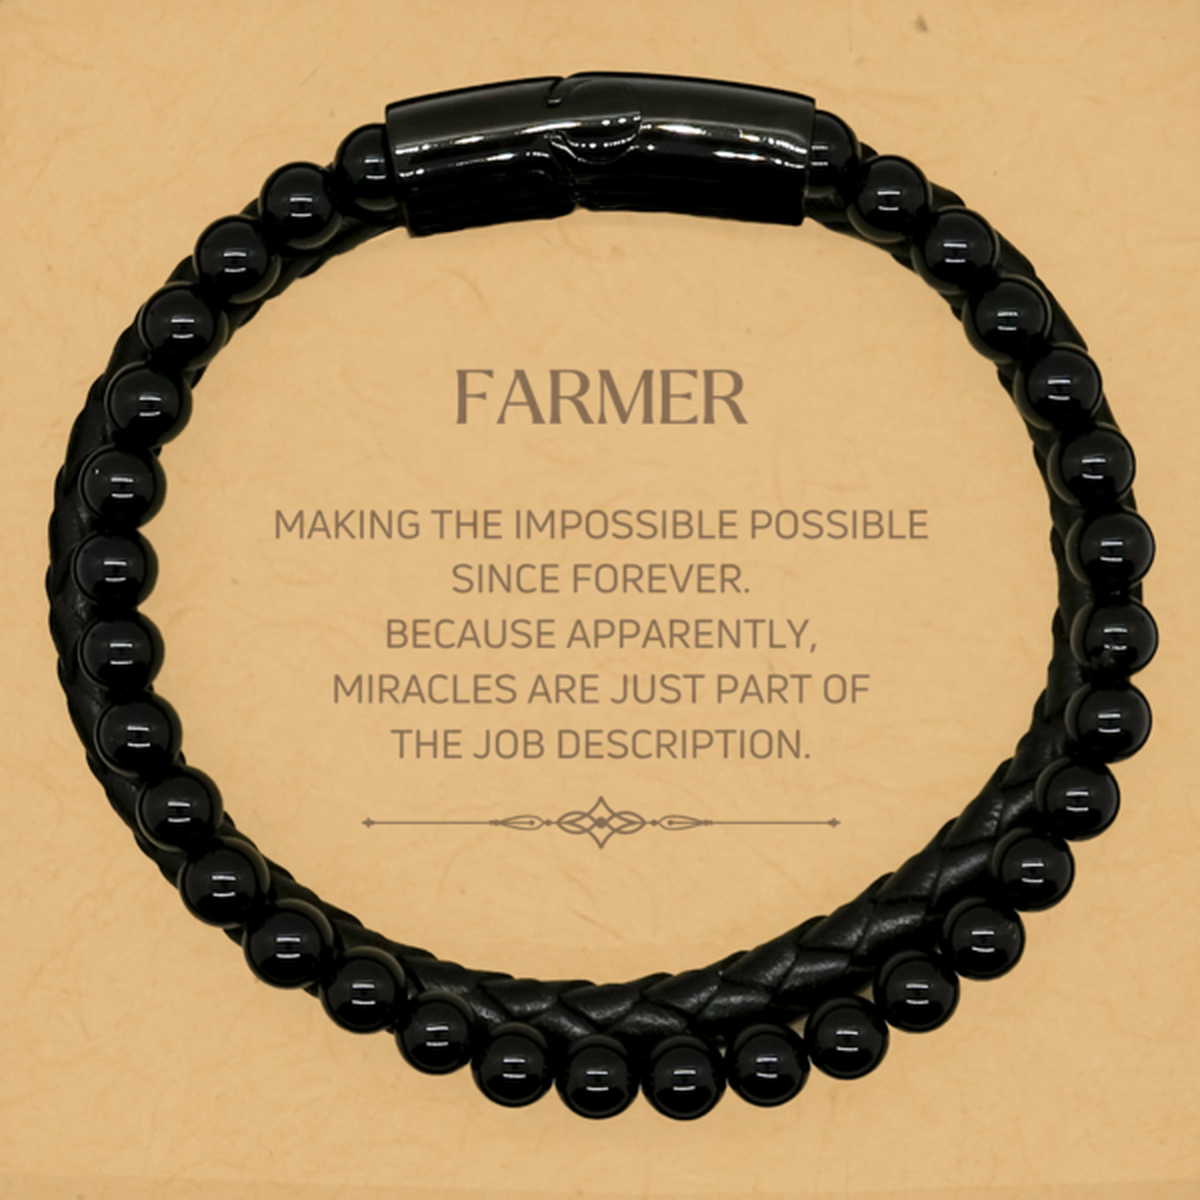 Funny Farmer Gifts, Miracles are just part of the job description, Inspirational Birthday Stone Leather Bracelets For Farmer, Men, Women, Coworkers, Friends, Boss